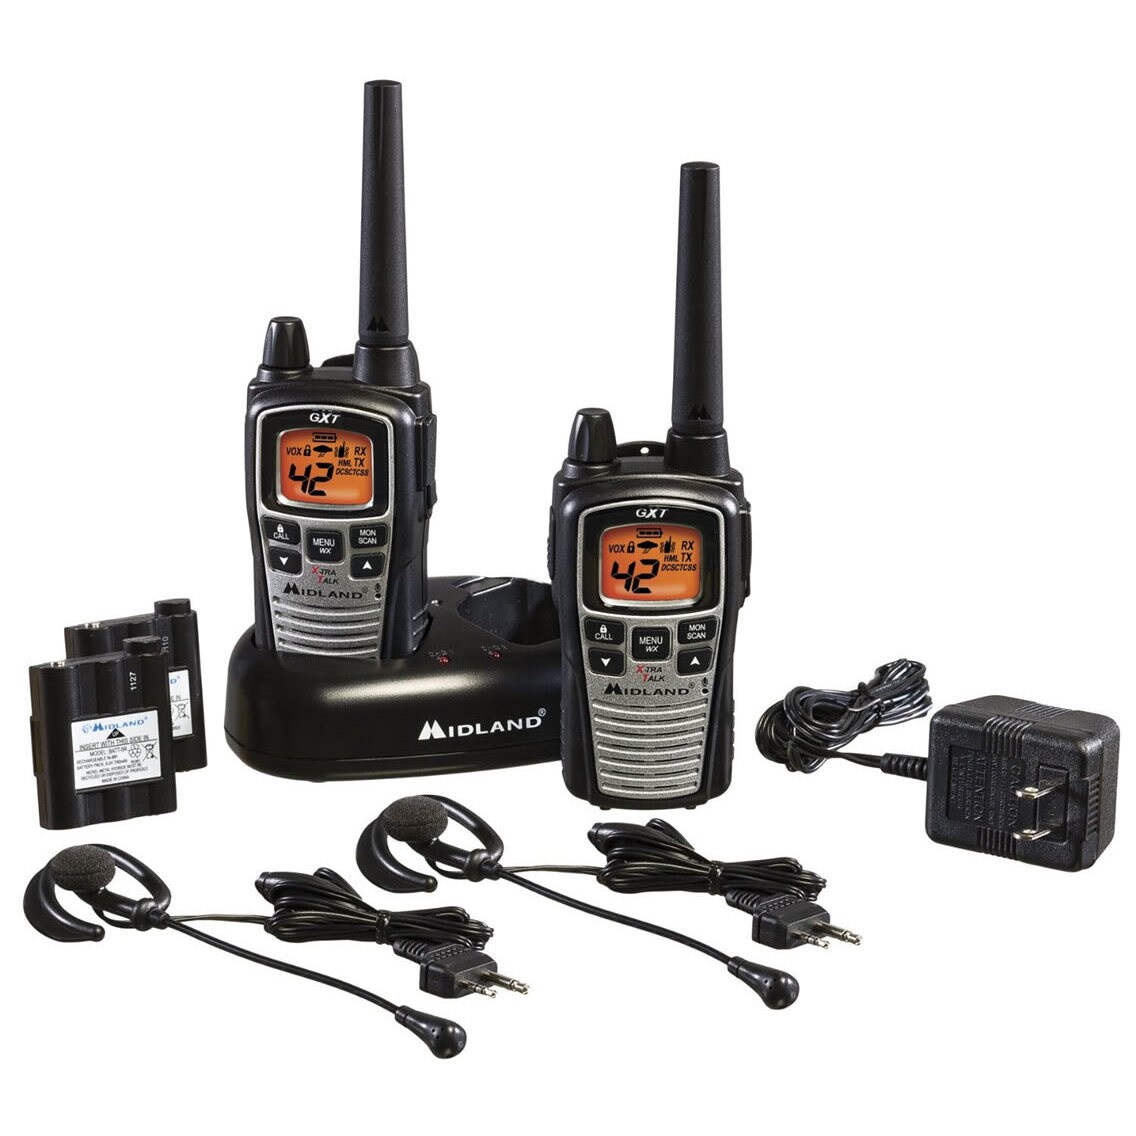 MIDLAND GXT860VP4 36-Mile GMRS Radio Pair Pack with Drop-in Charger Rechargeable Batteries & Headsets - image 3 of 3